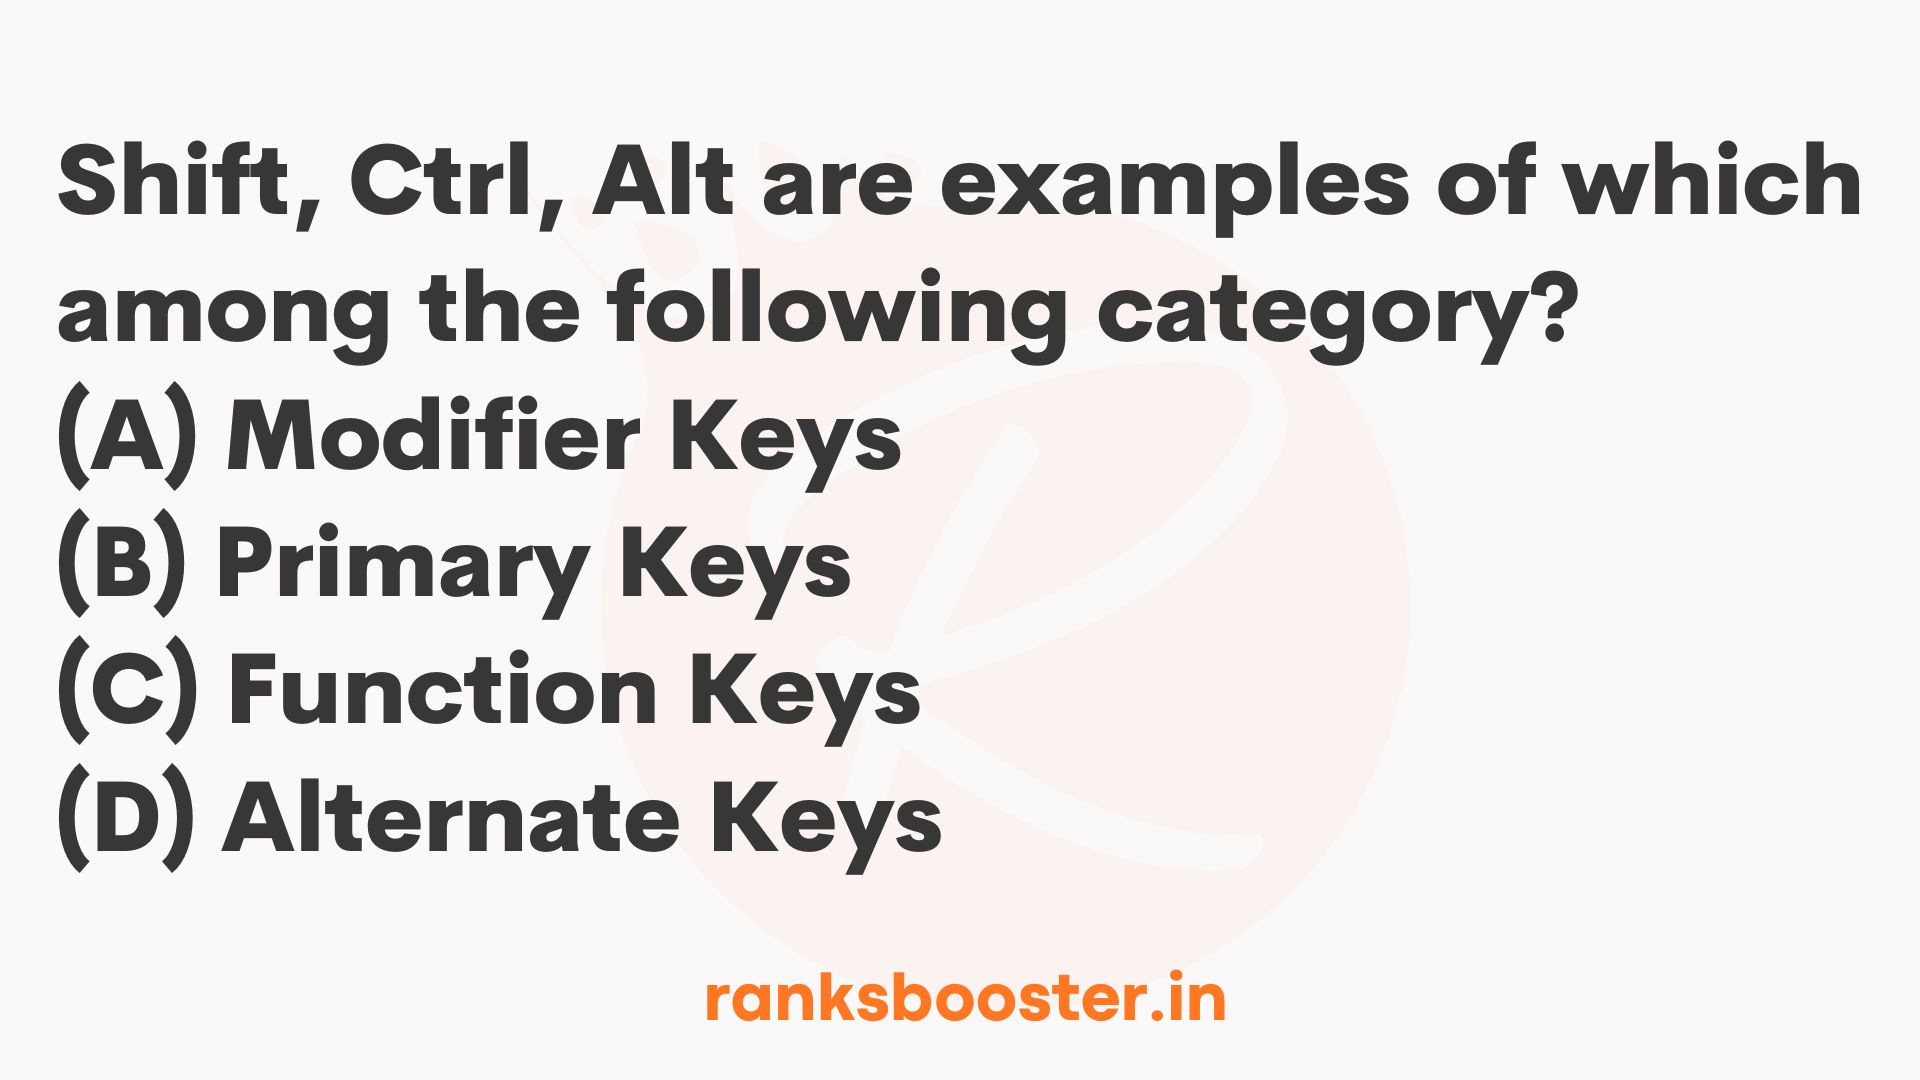 Shift, Ctrl, Alt are examples of which among the following category? (A) Modifier Keys (B) Primary Keys (C) Function Keys (D) Alternate Keys